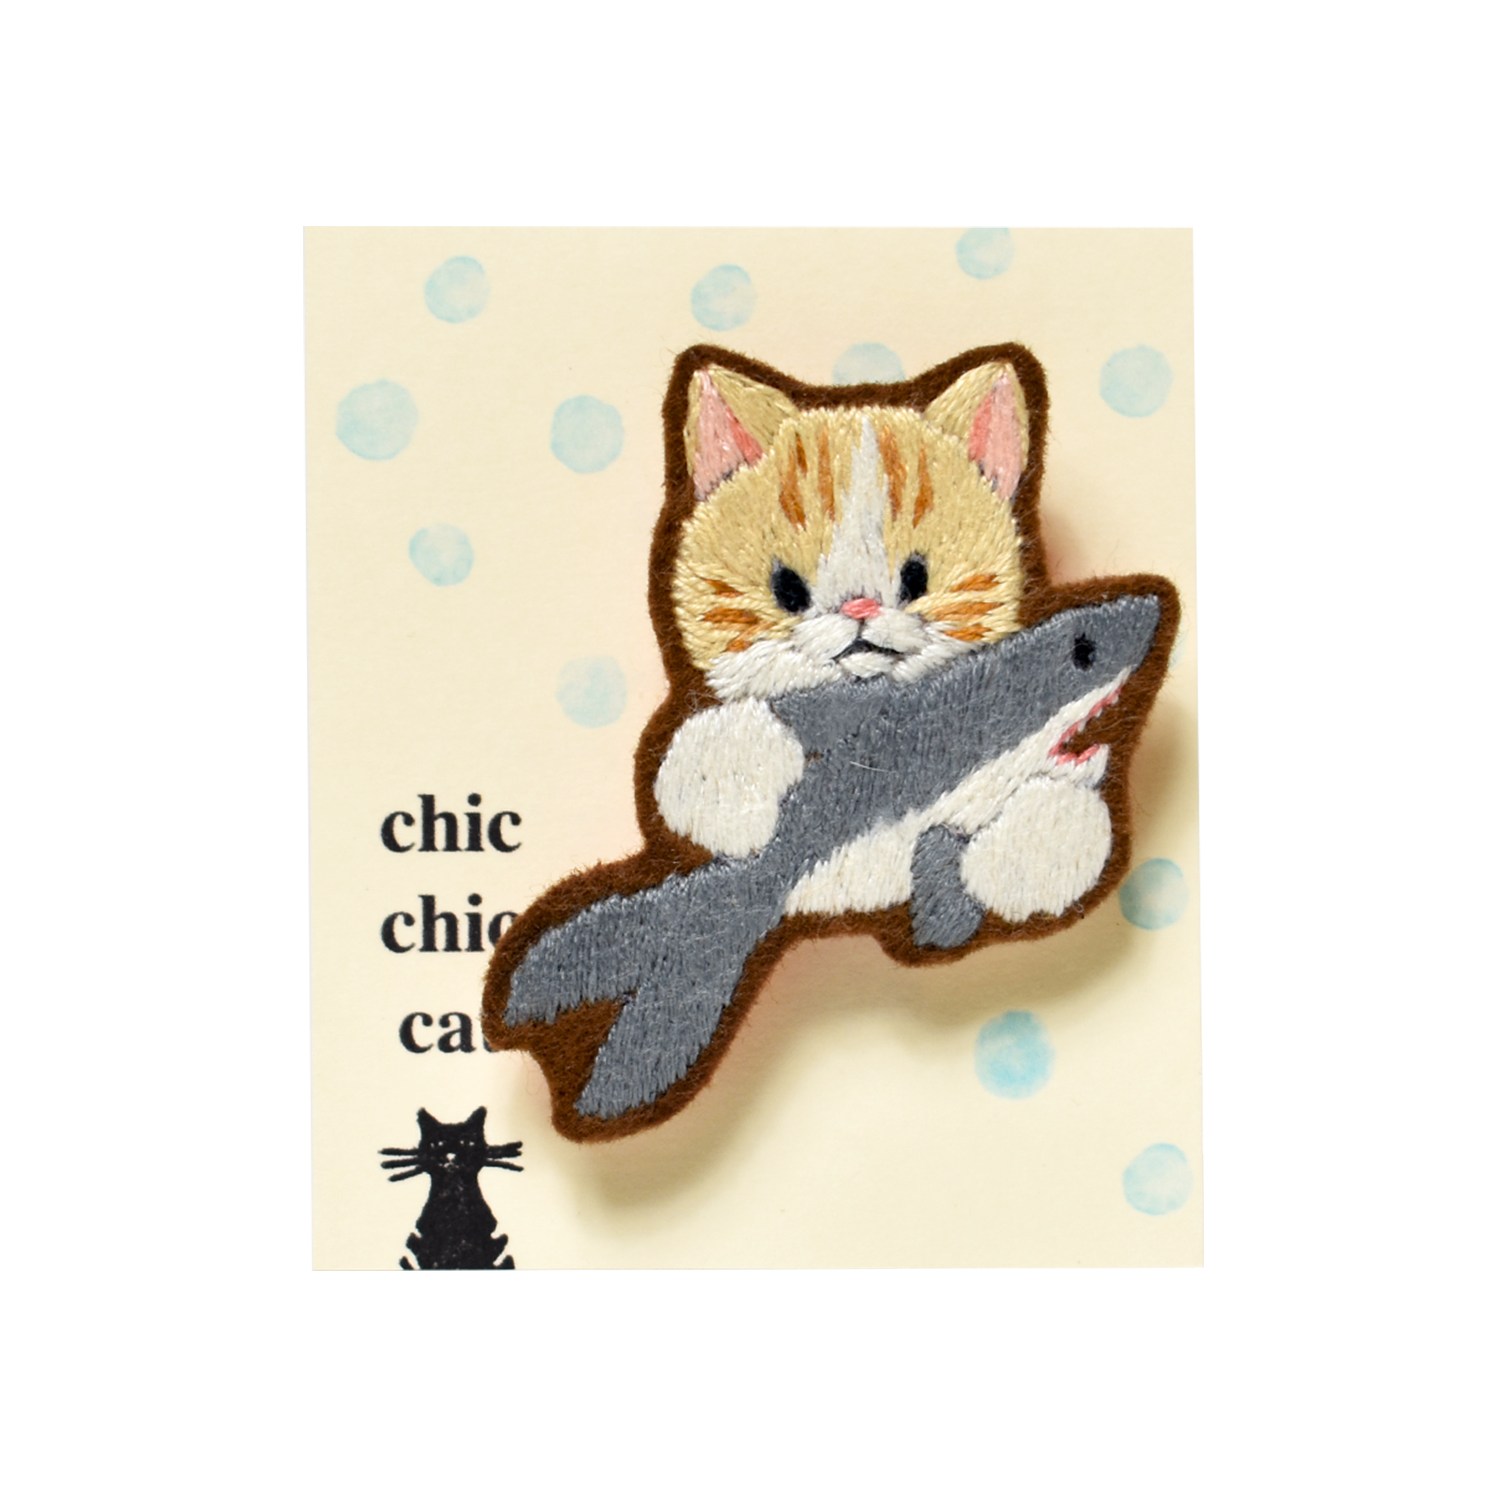 chic_chic_cat japanese handmade Cat Holding a Shark Embroidered Brooch RARE FIND ZAKKA